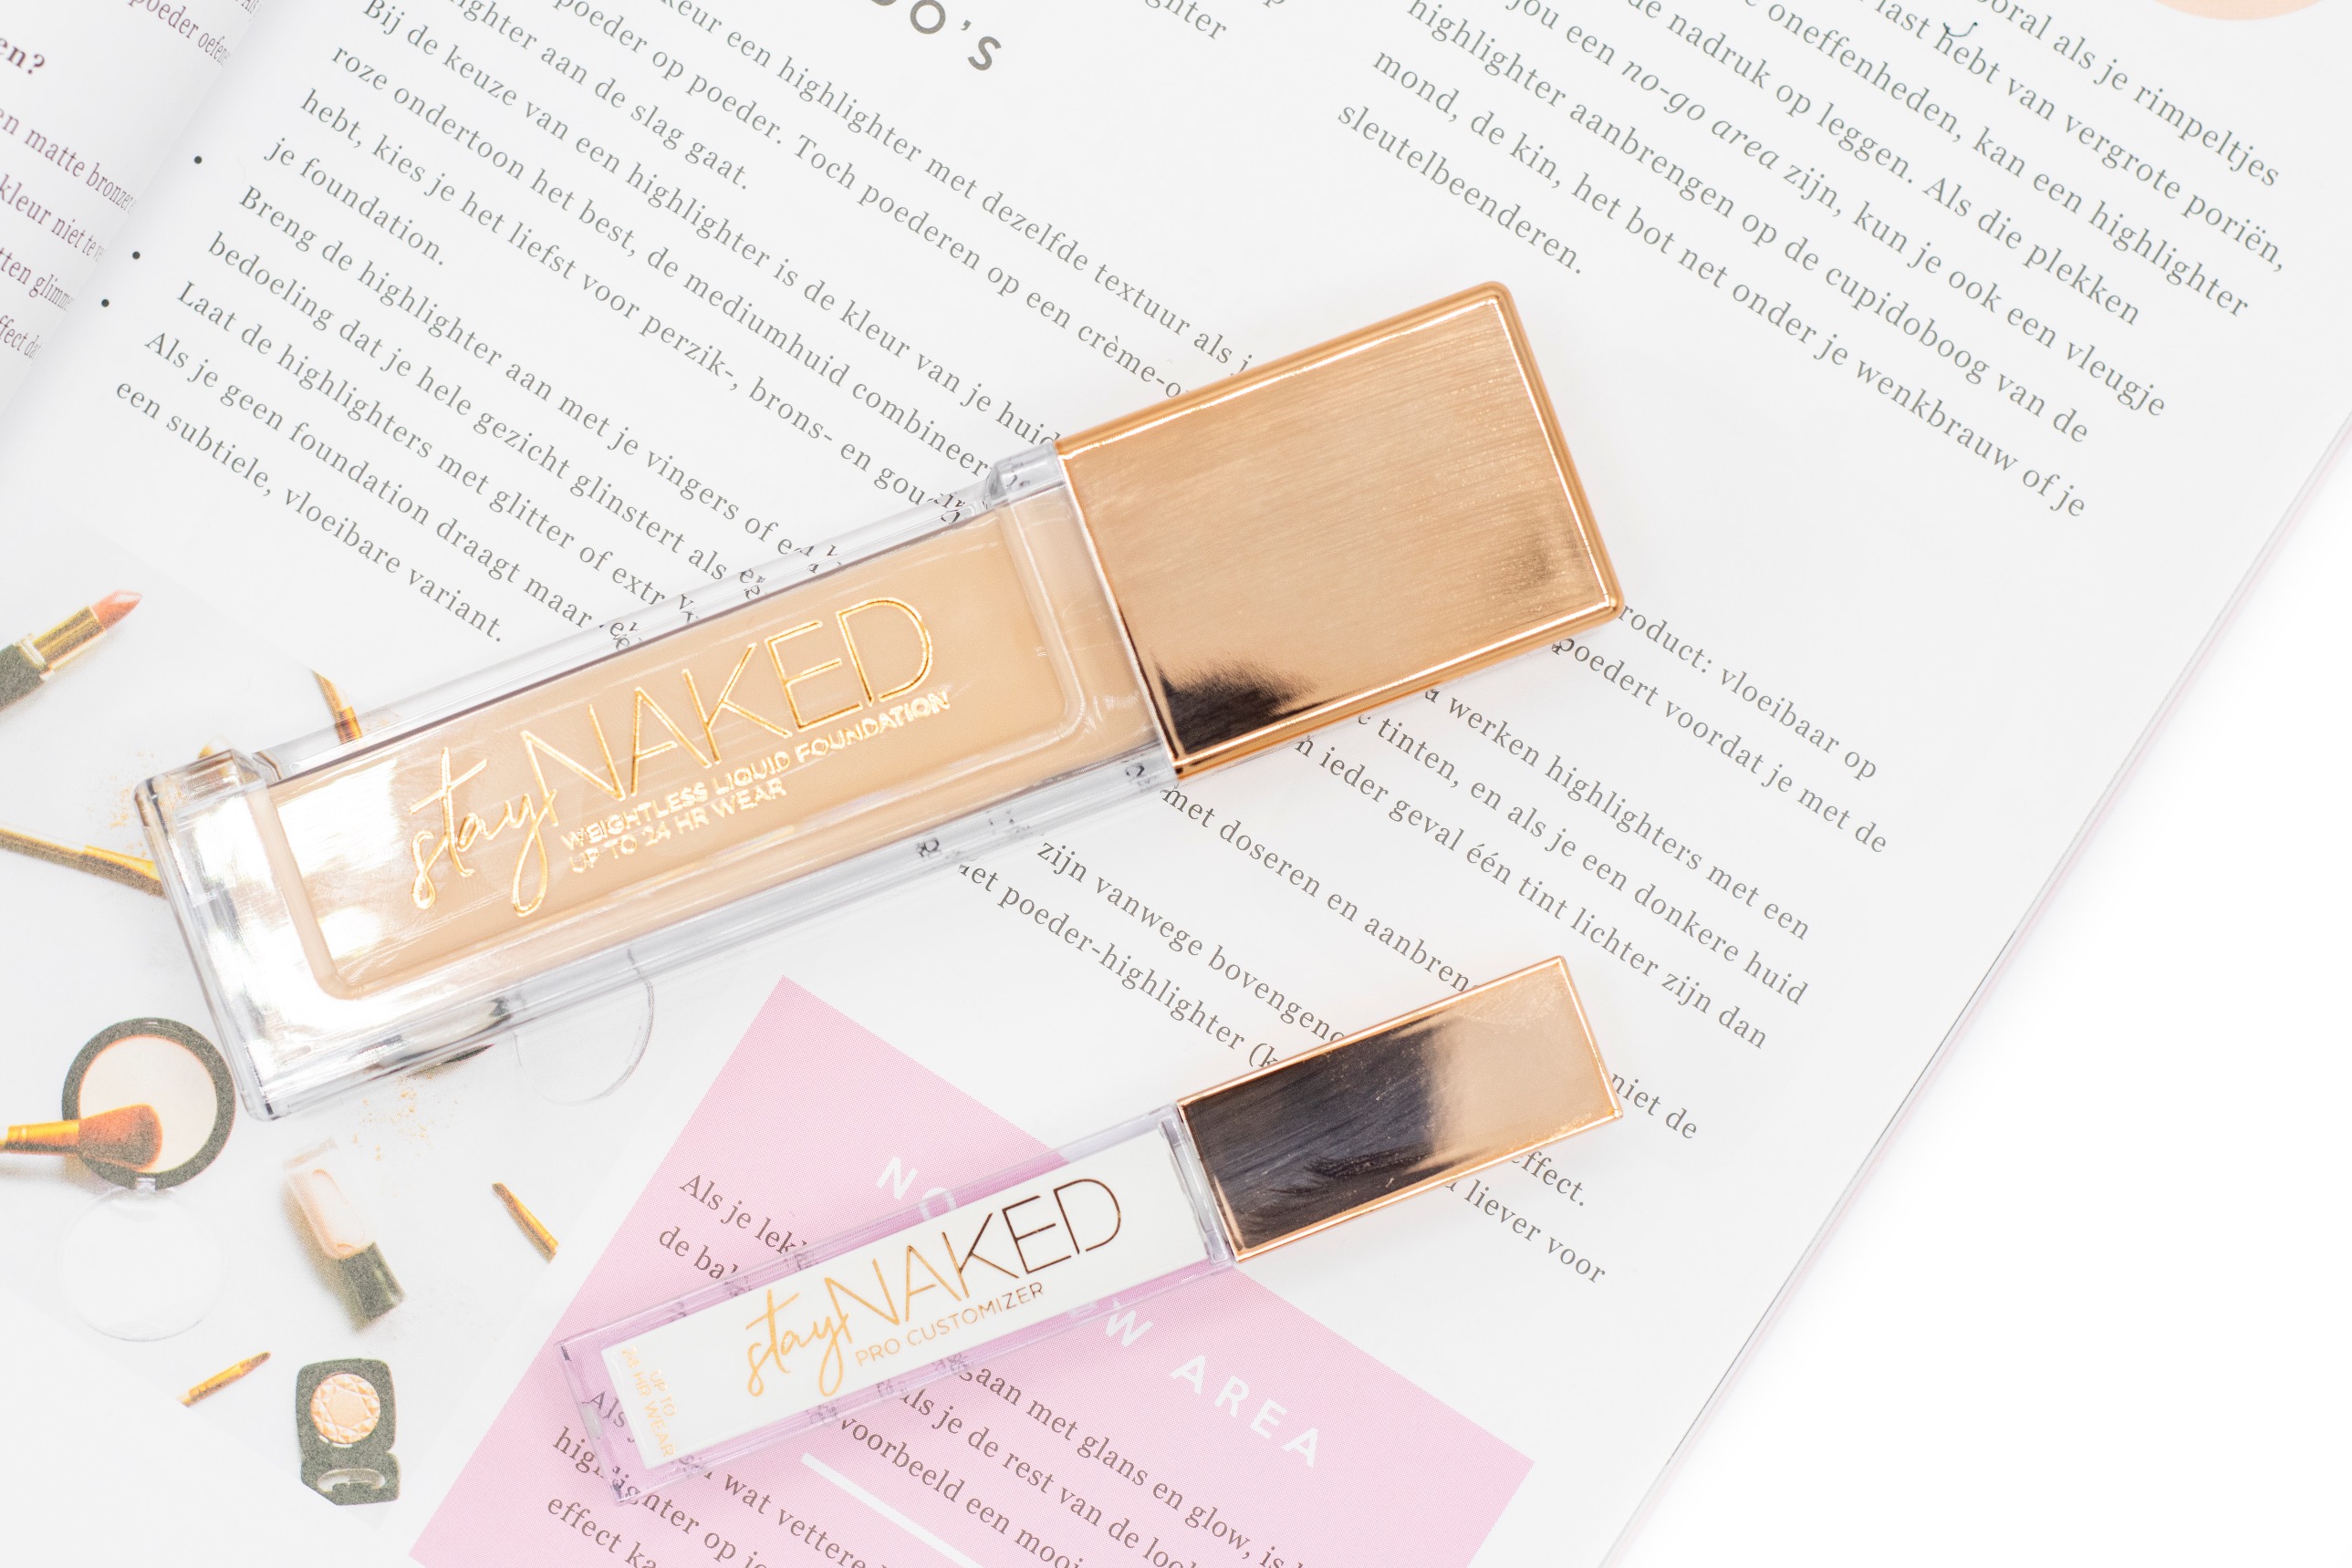 Urban Decay stay naked foundation review